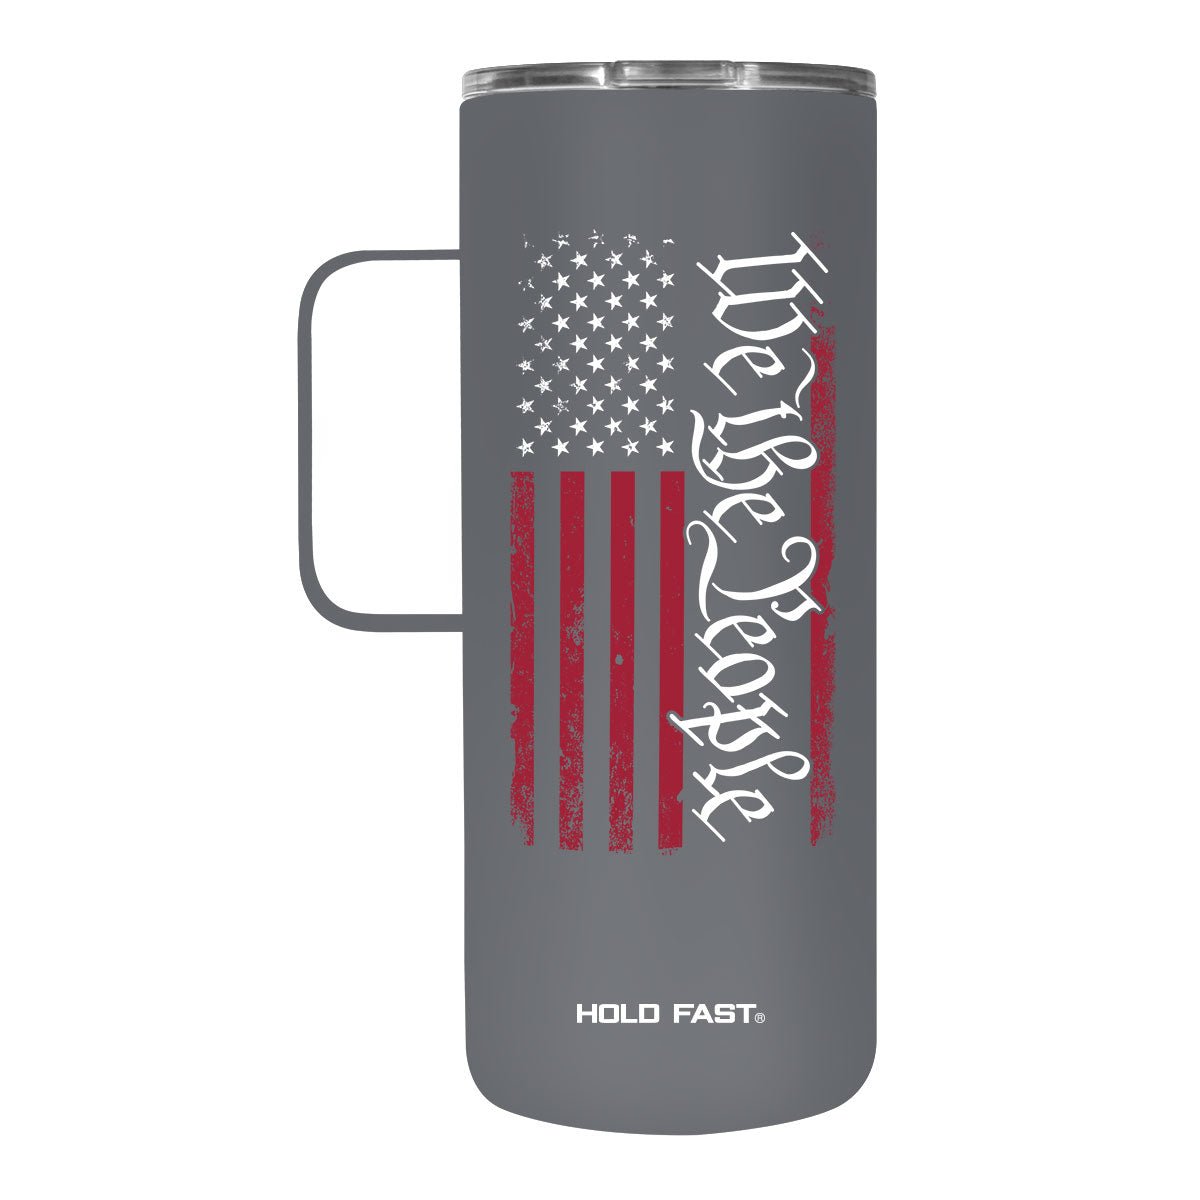 Kerusso 22 oz We The People Stainless Steel Tumbler | 2FruitBearers